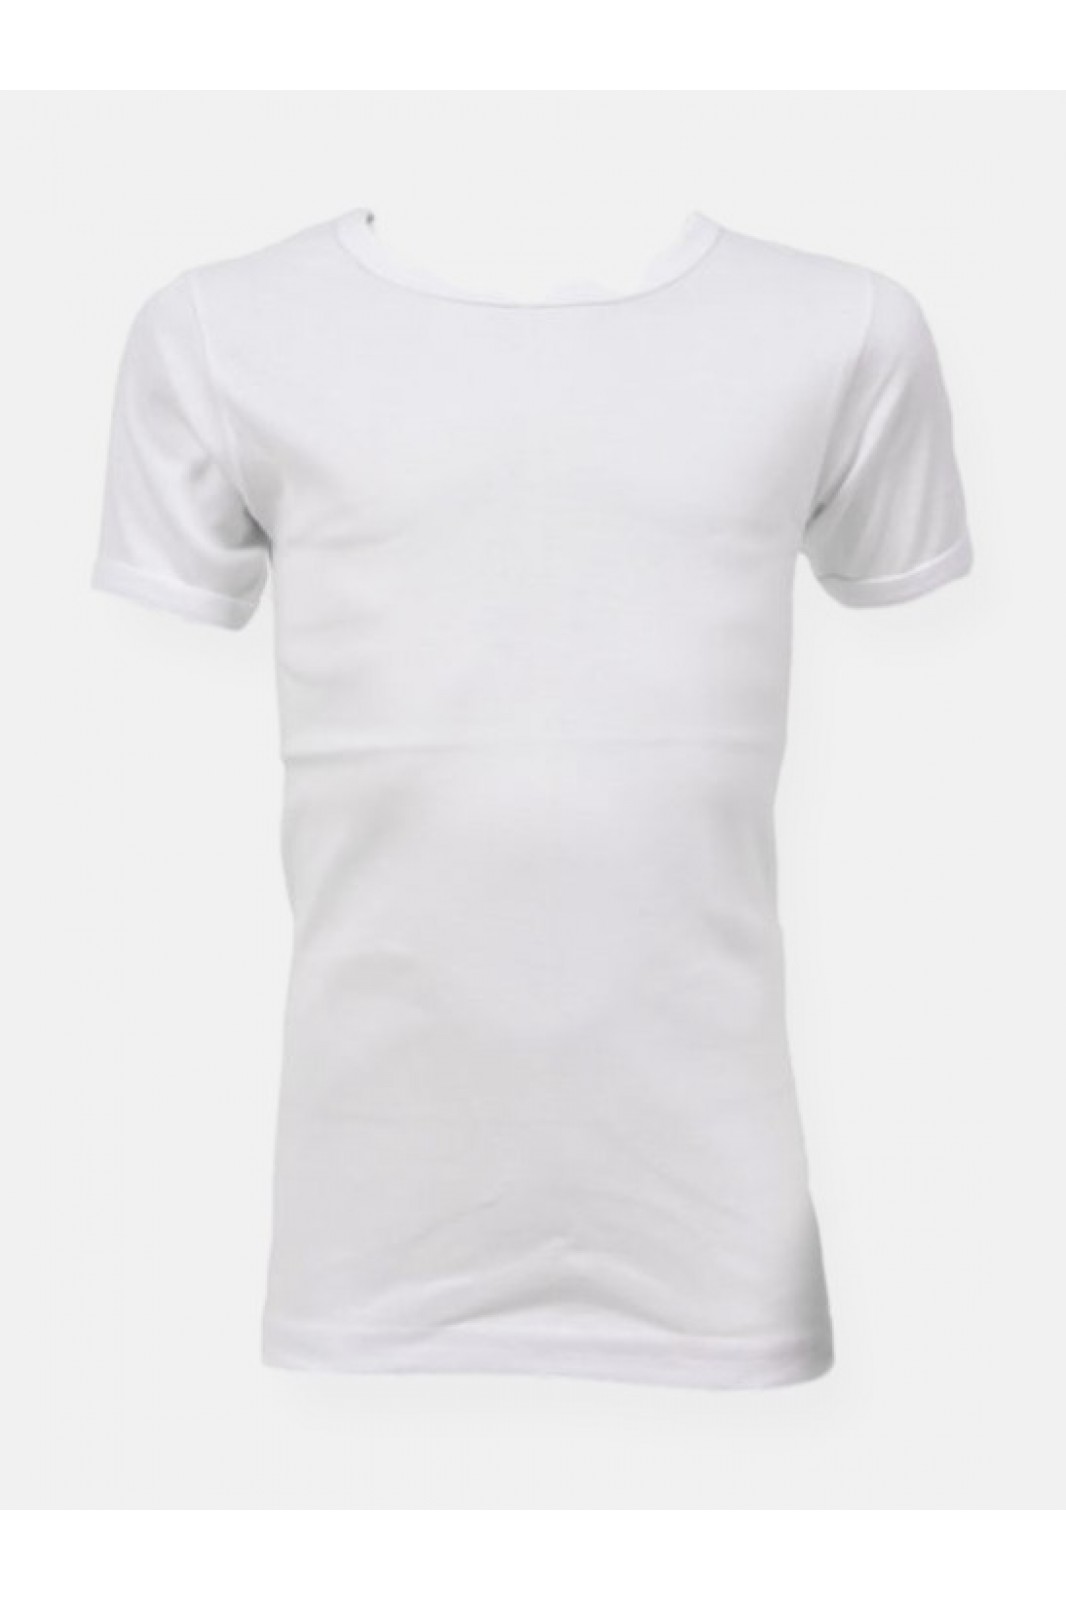 Kids Cotton Undershirts in White colour